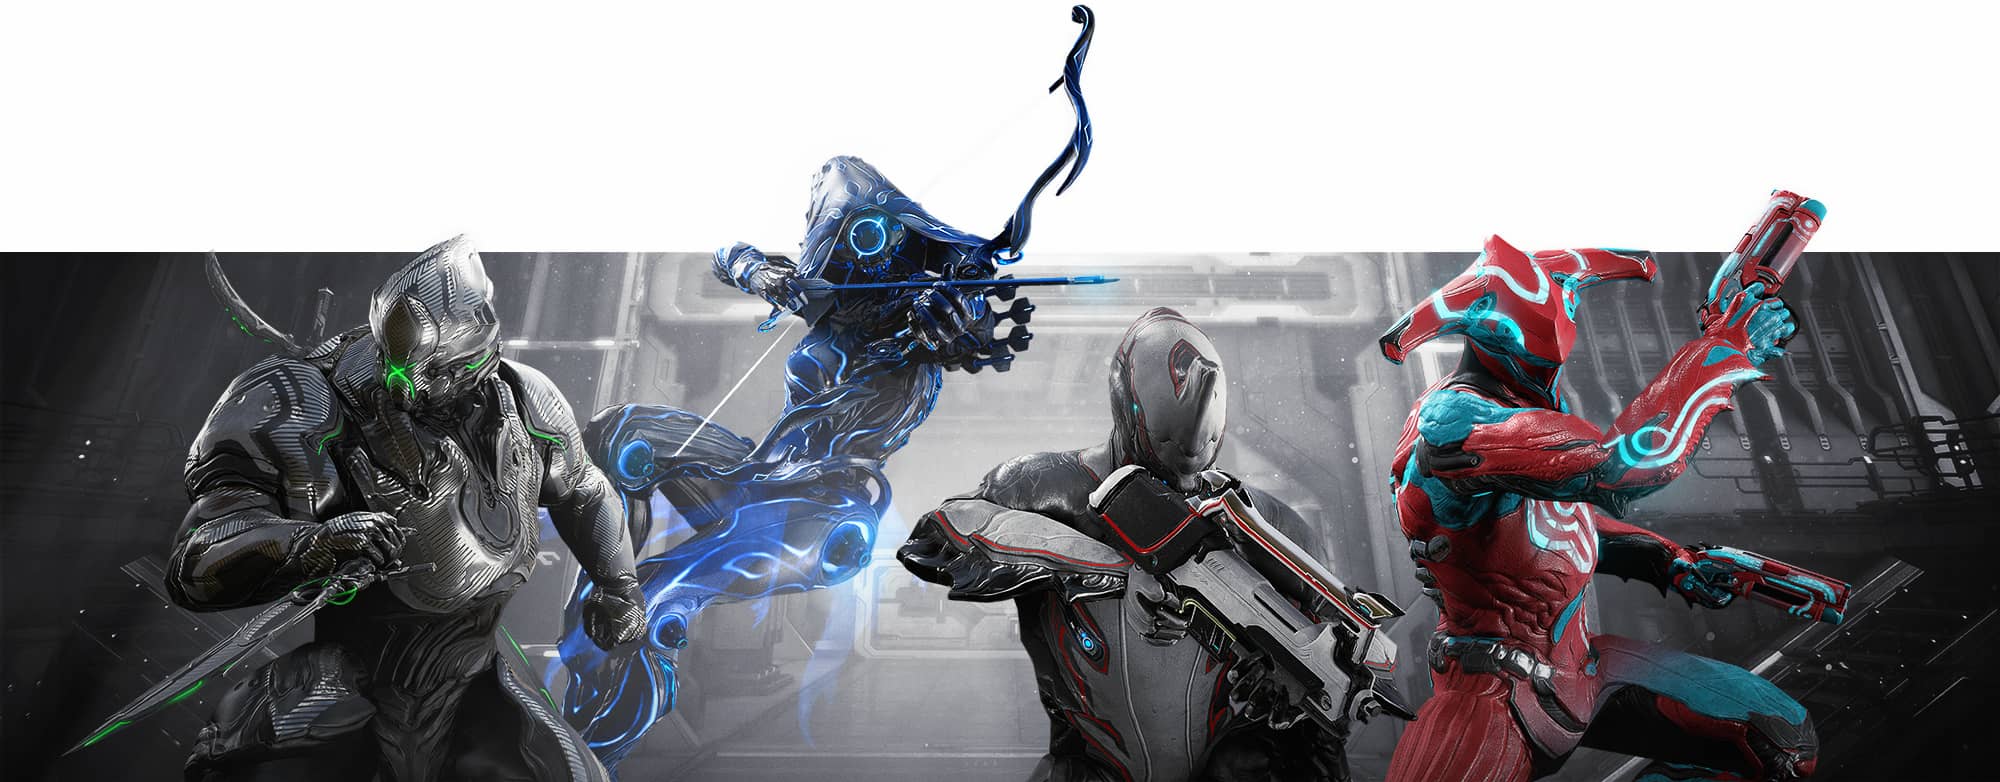 A group of Warframes in platform exclusive skins standing shoulder to shoulder ready to take on foes.